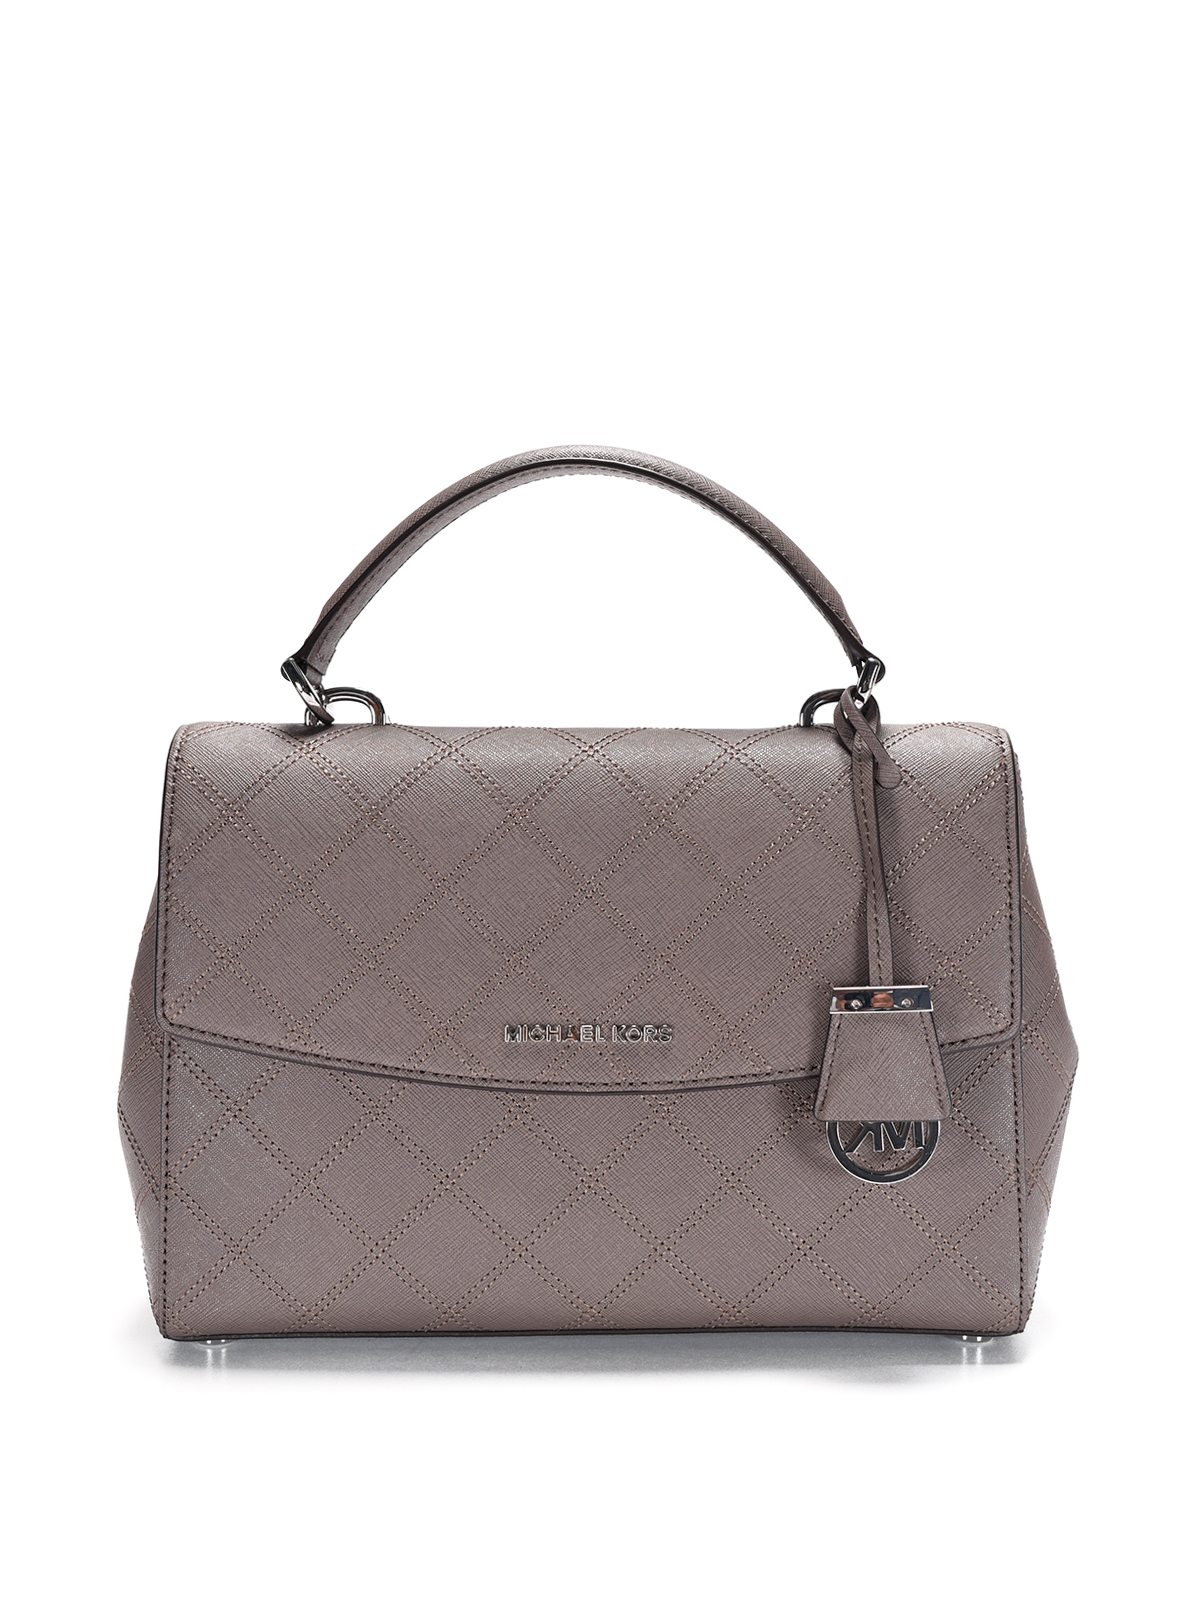 Totes bags Michael Kors - Ava quilted Saffiano satchel - 30F5SAVS2T